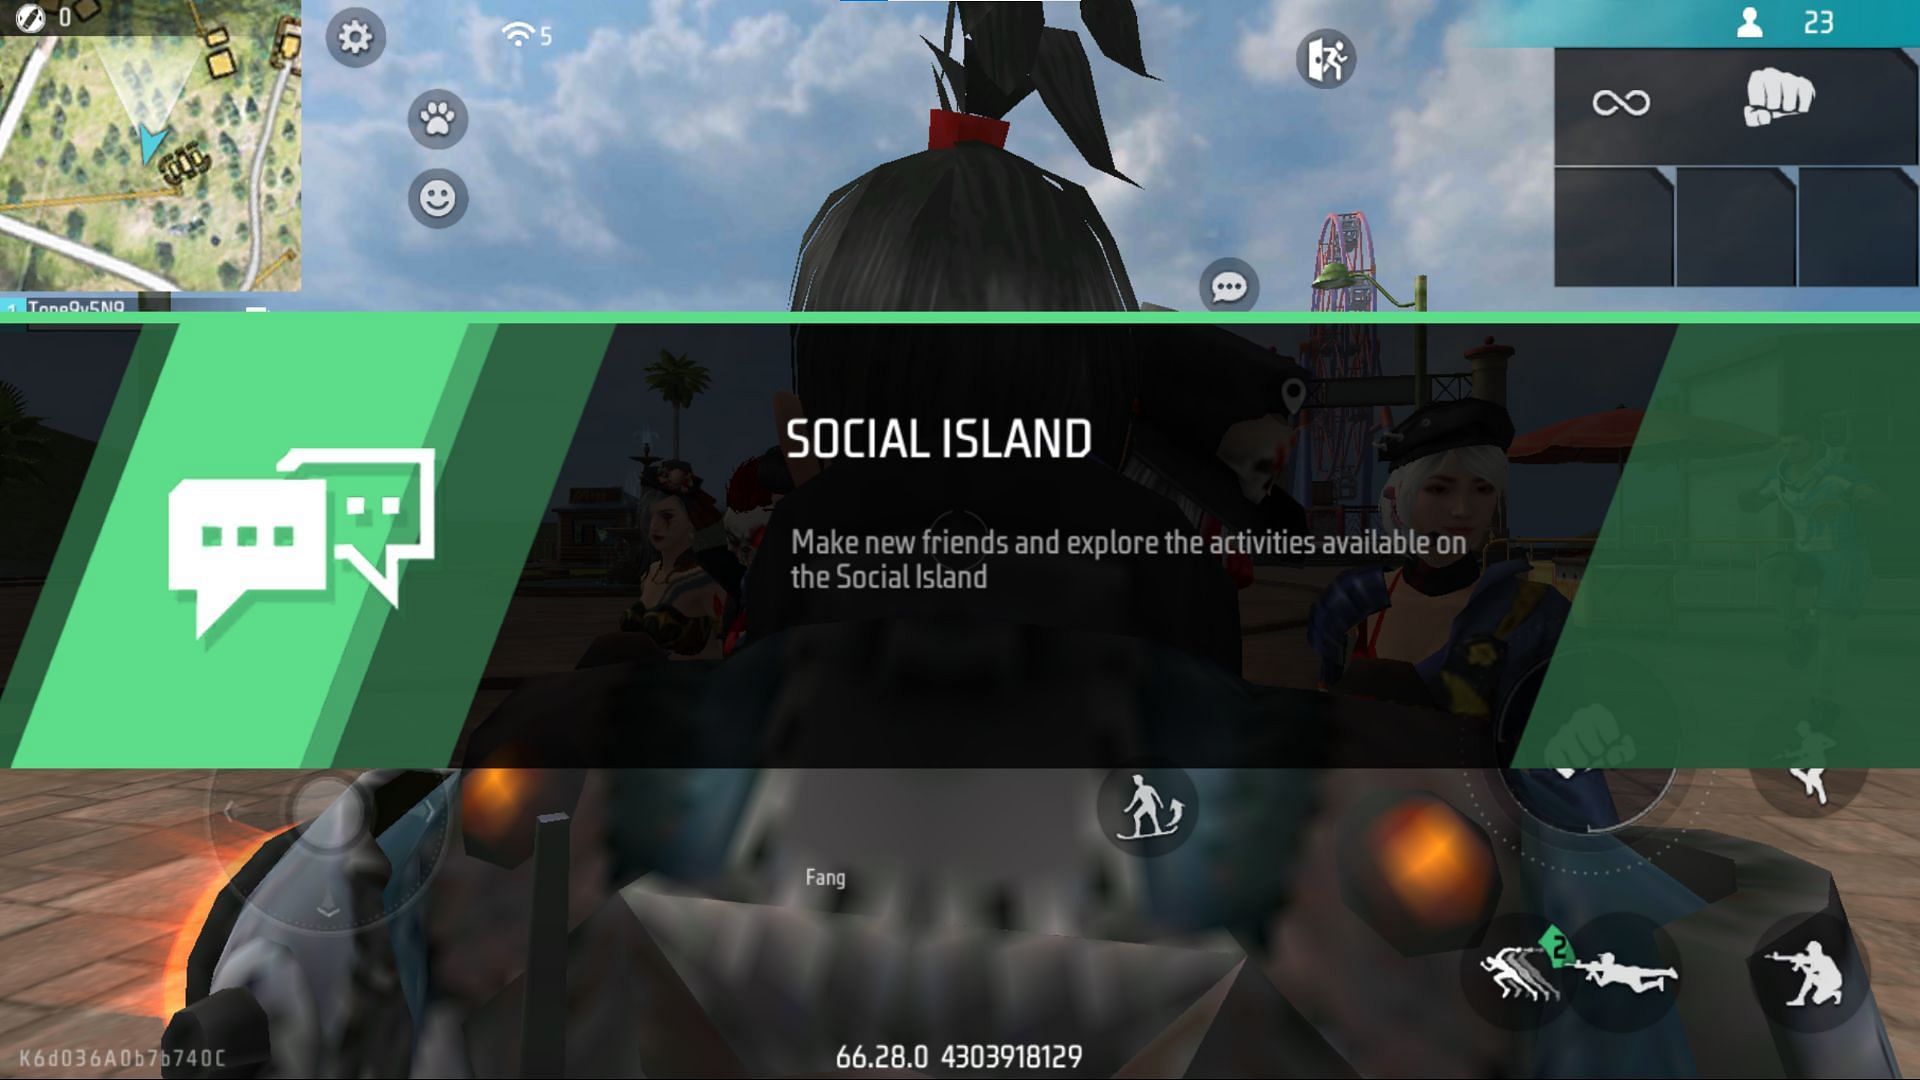 Players can interact with friends on Social Island (Image via Garena)